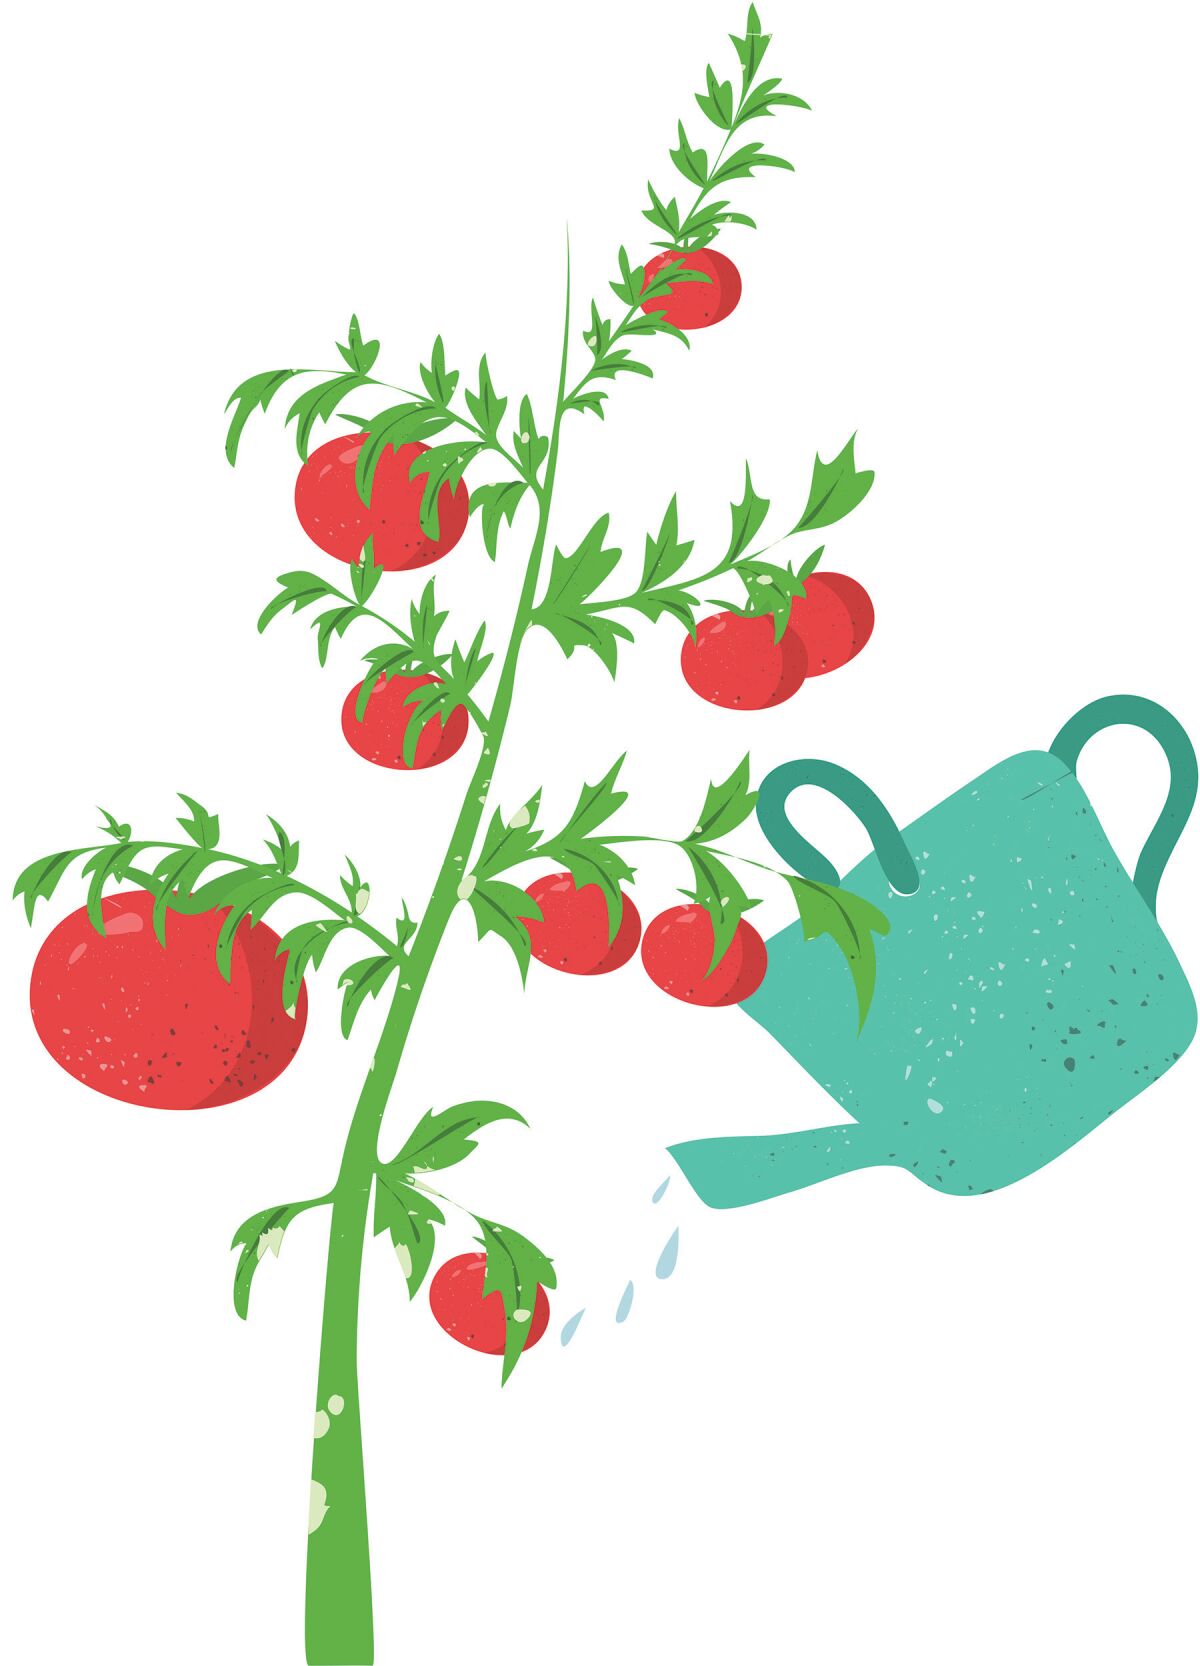 tomatoes plant png